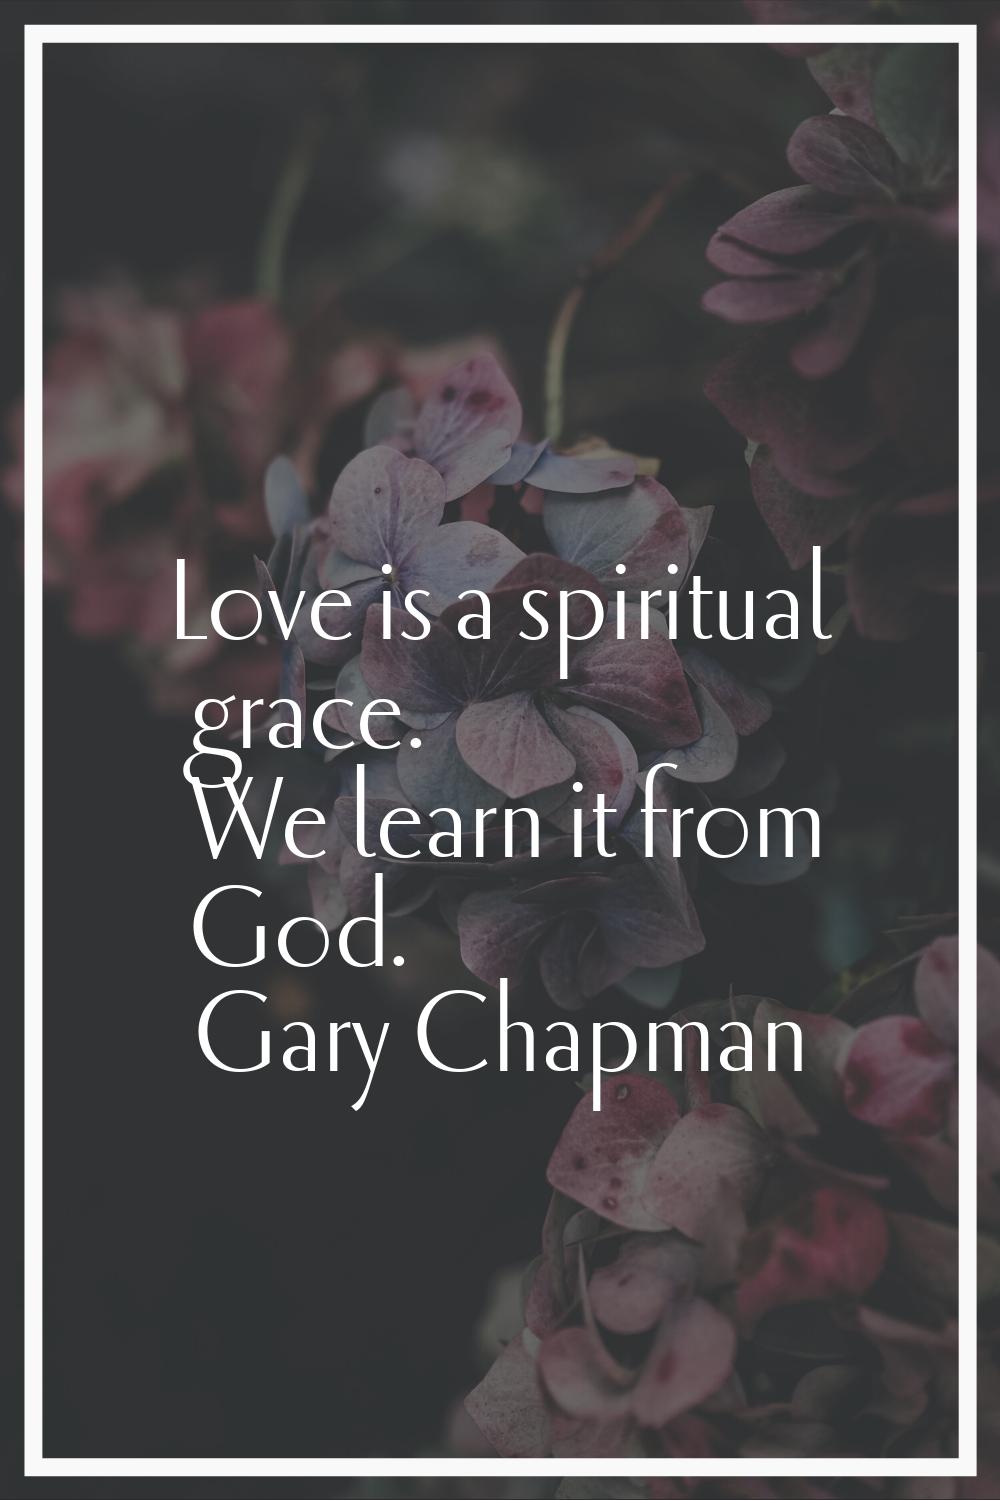 Love is a spiritual grace. We learn it from God.